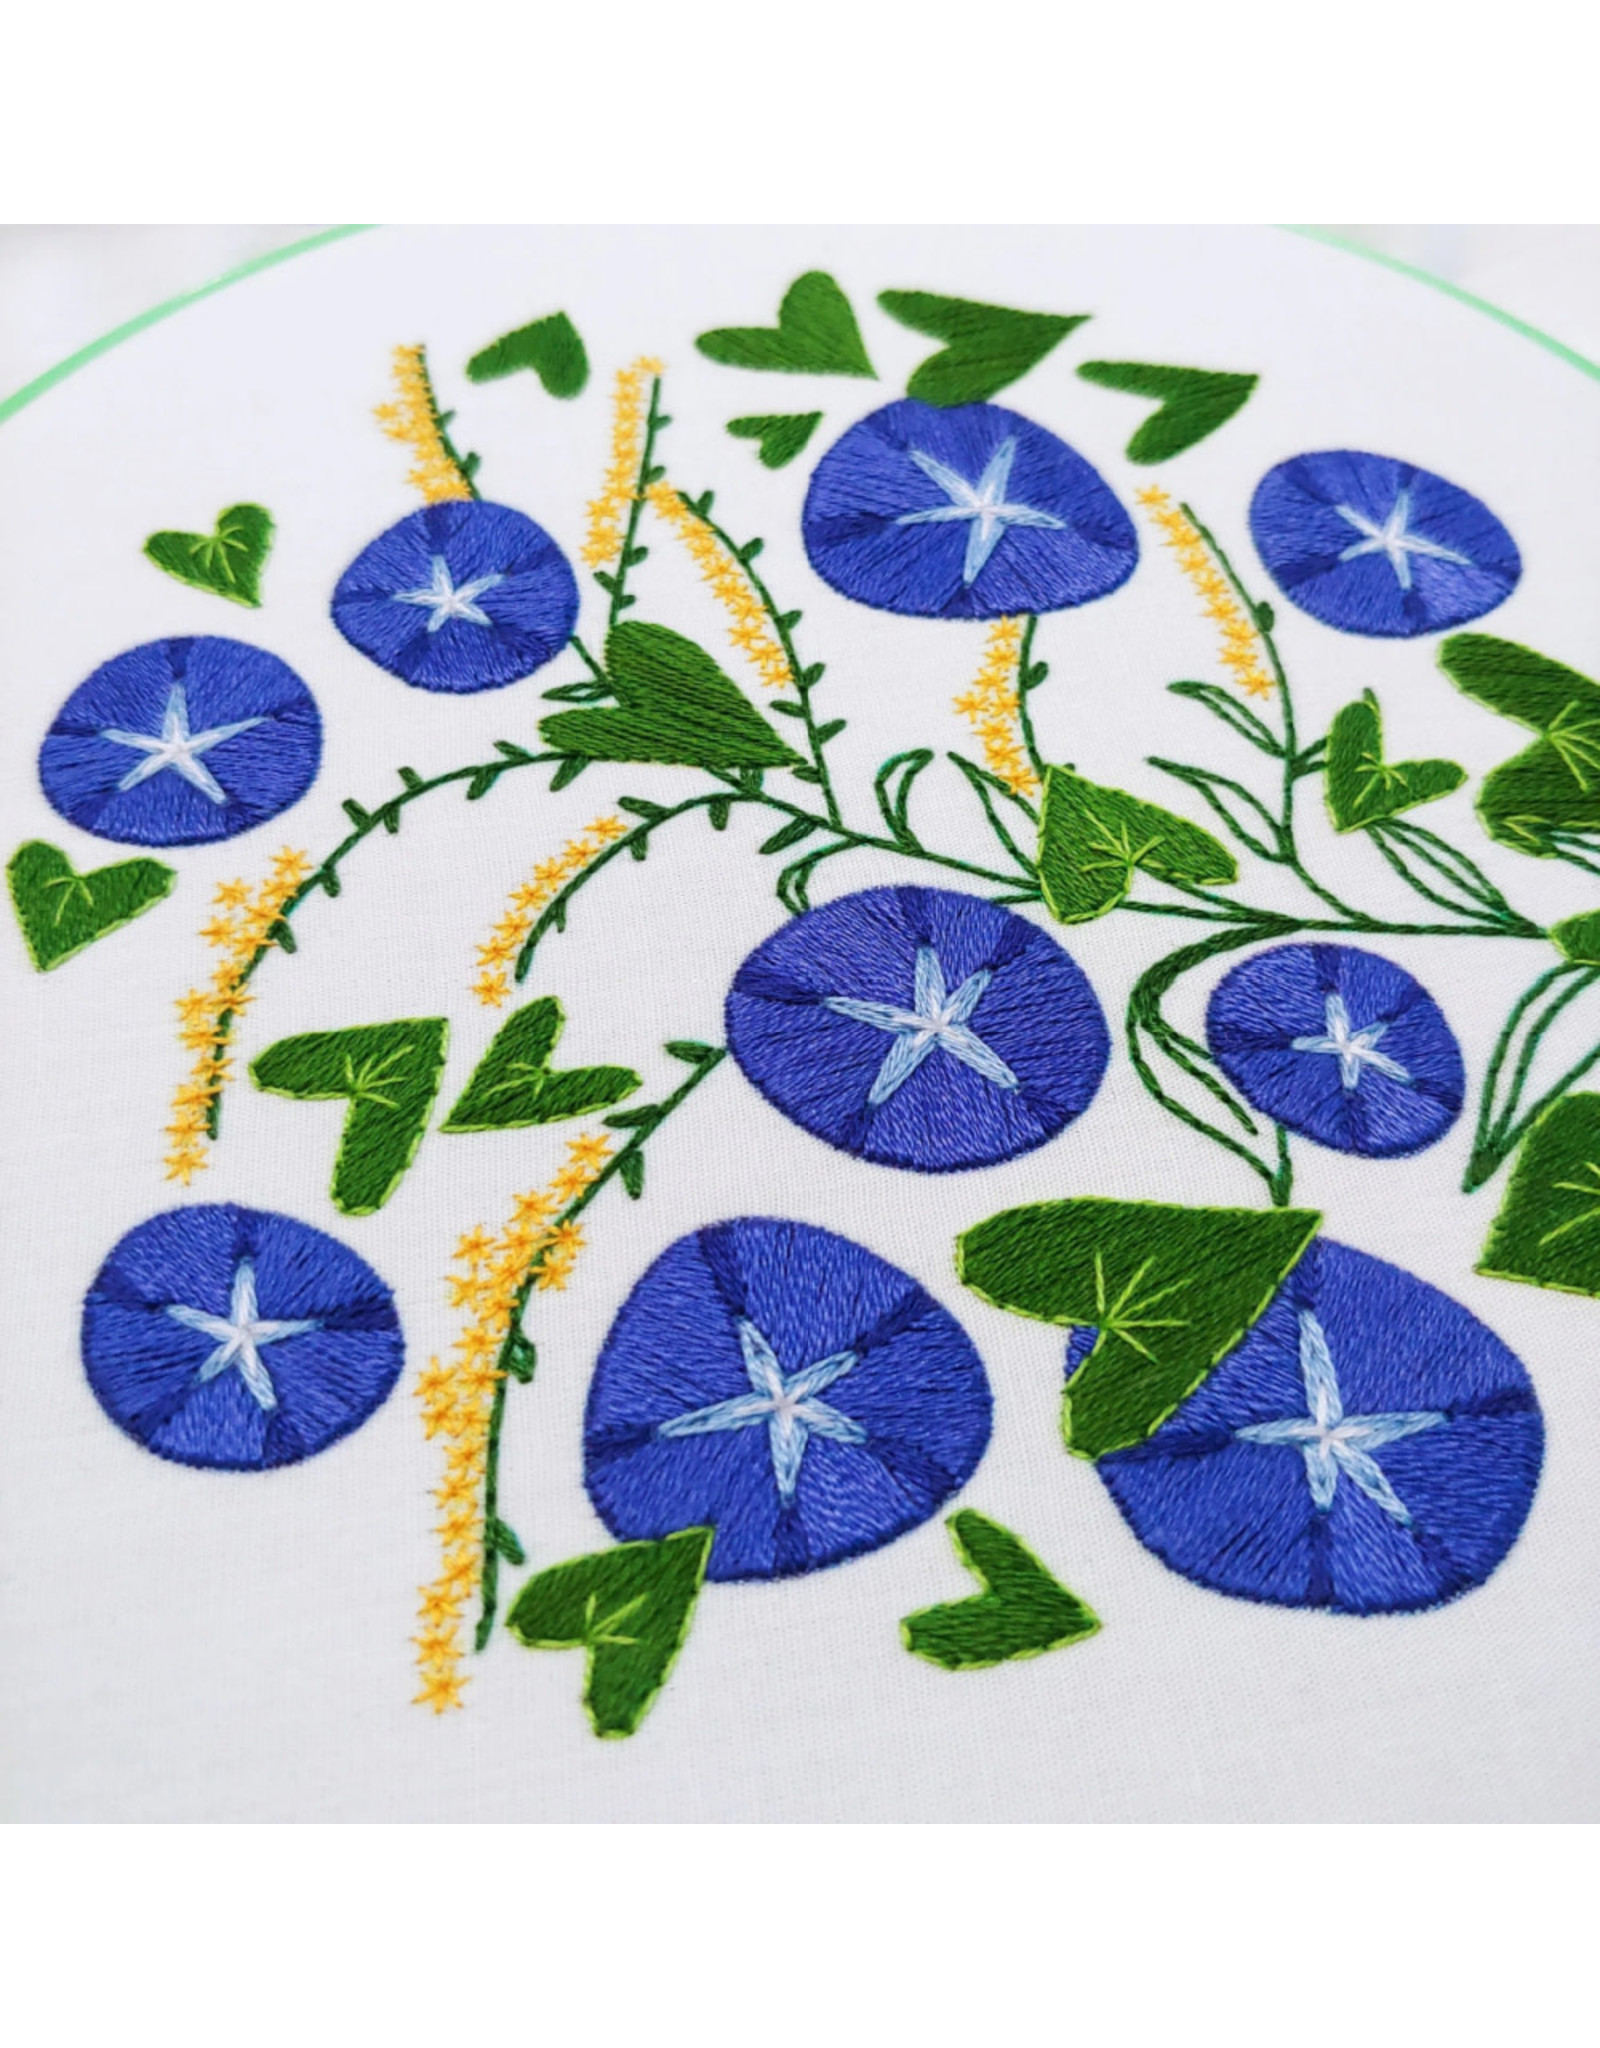 cozyblue *NEW* Morning Glory Embroidery Kit from cozyblue